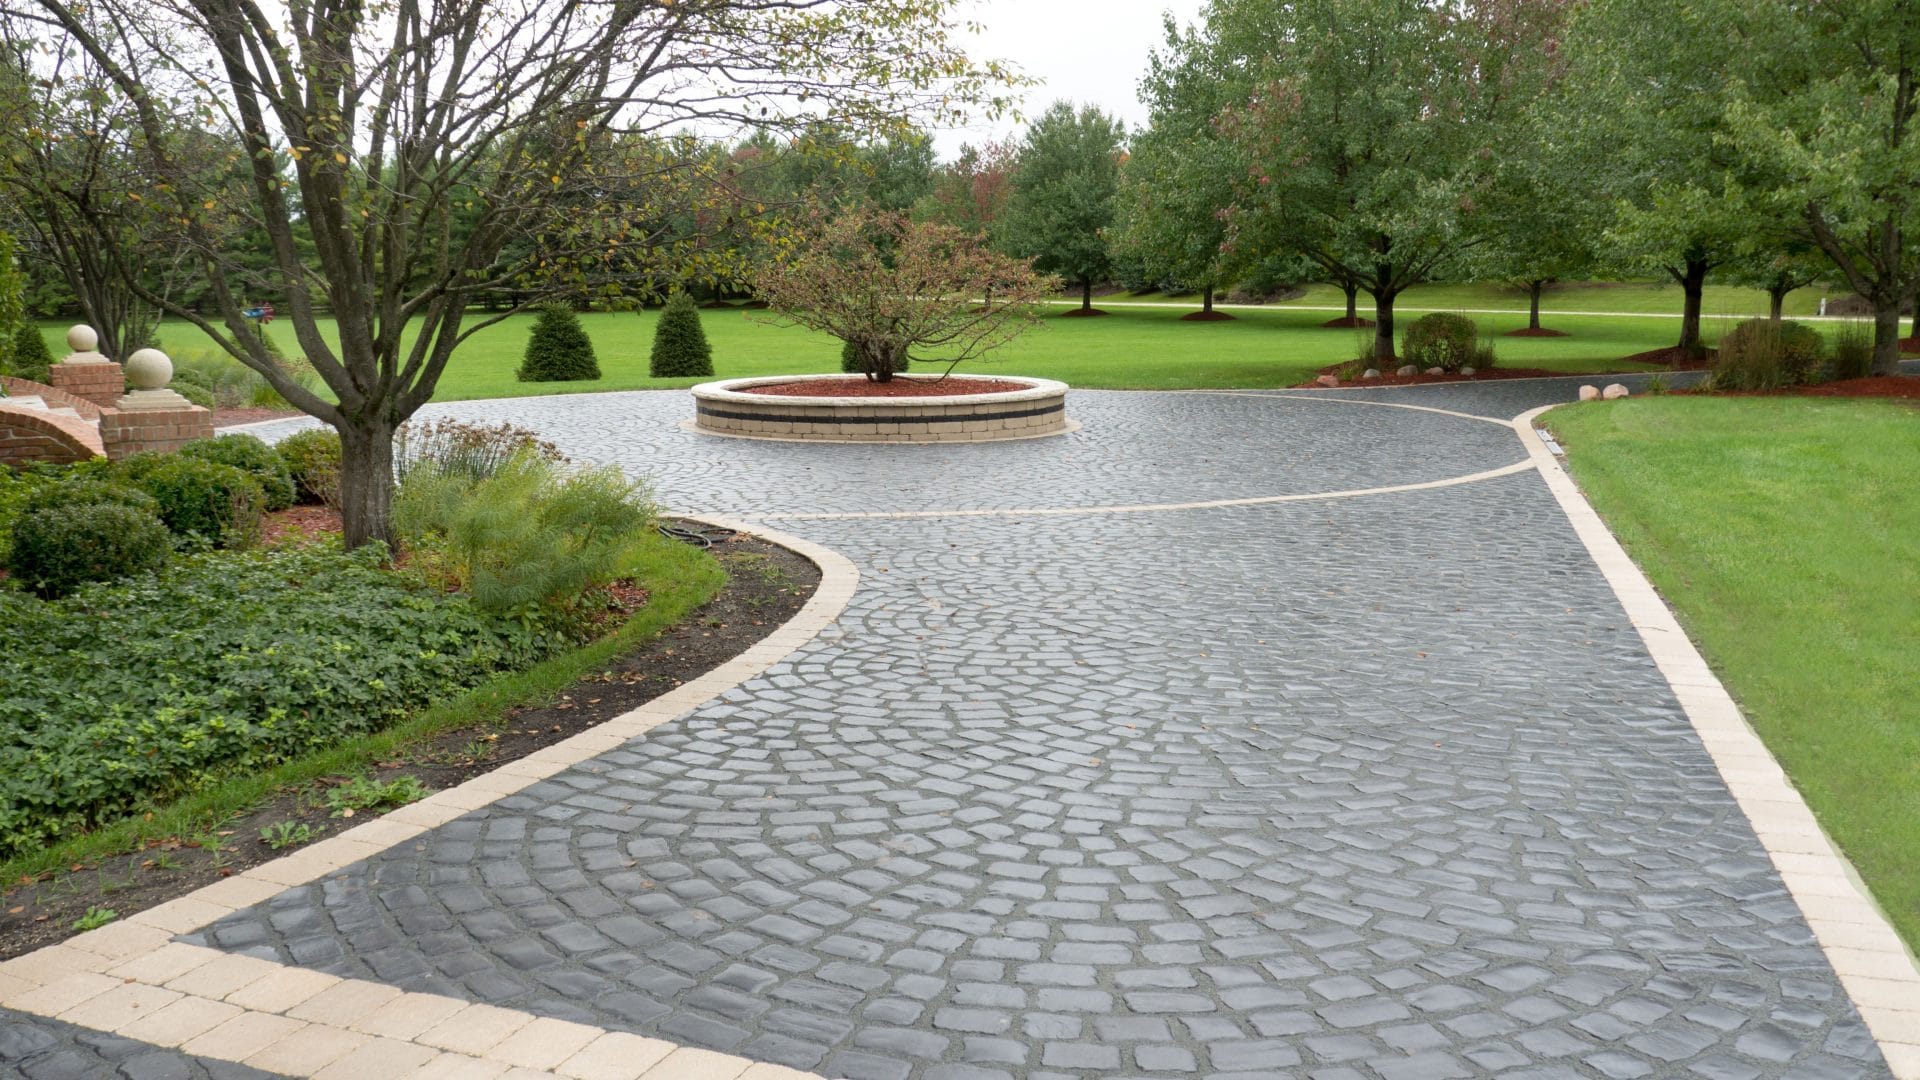 3 reasons to choose brick paving over concrete slabs